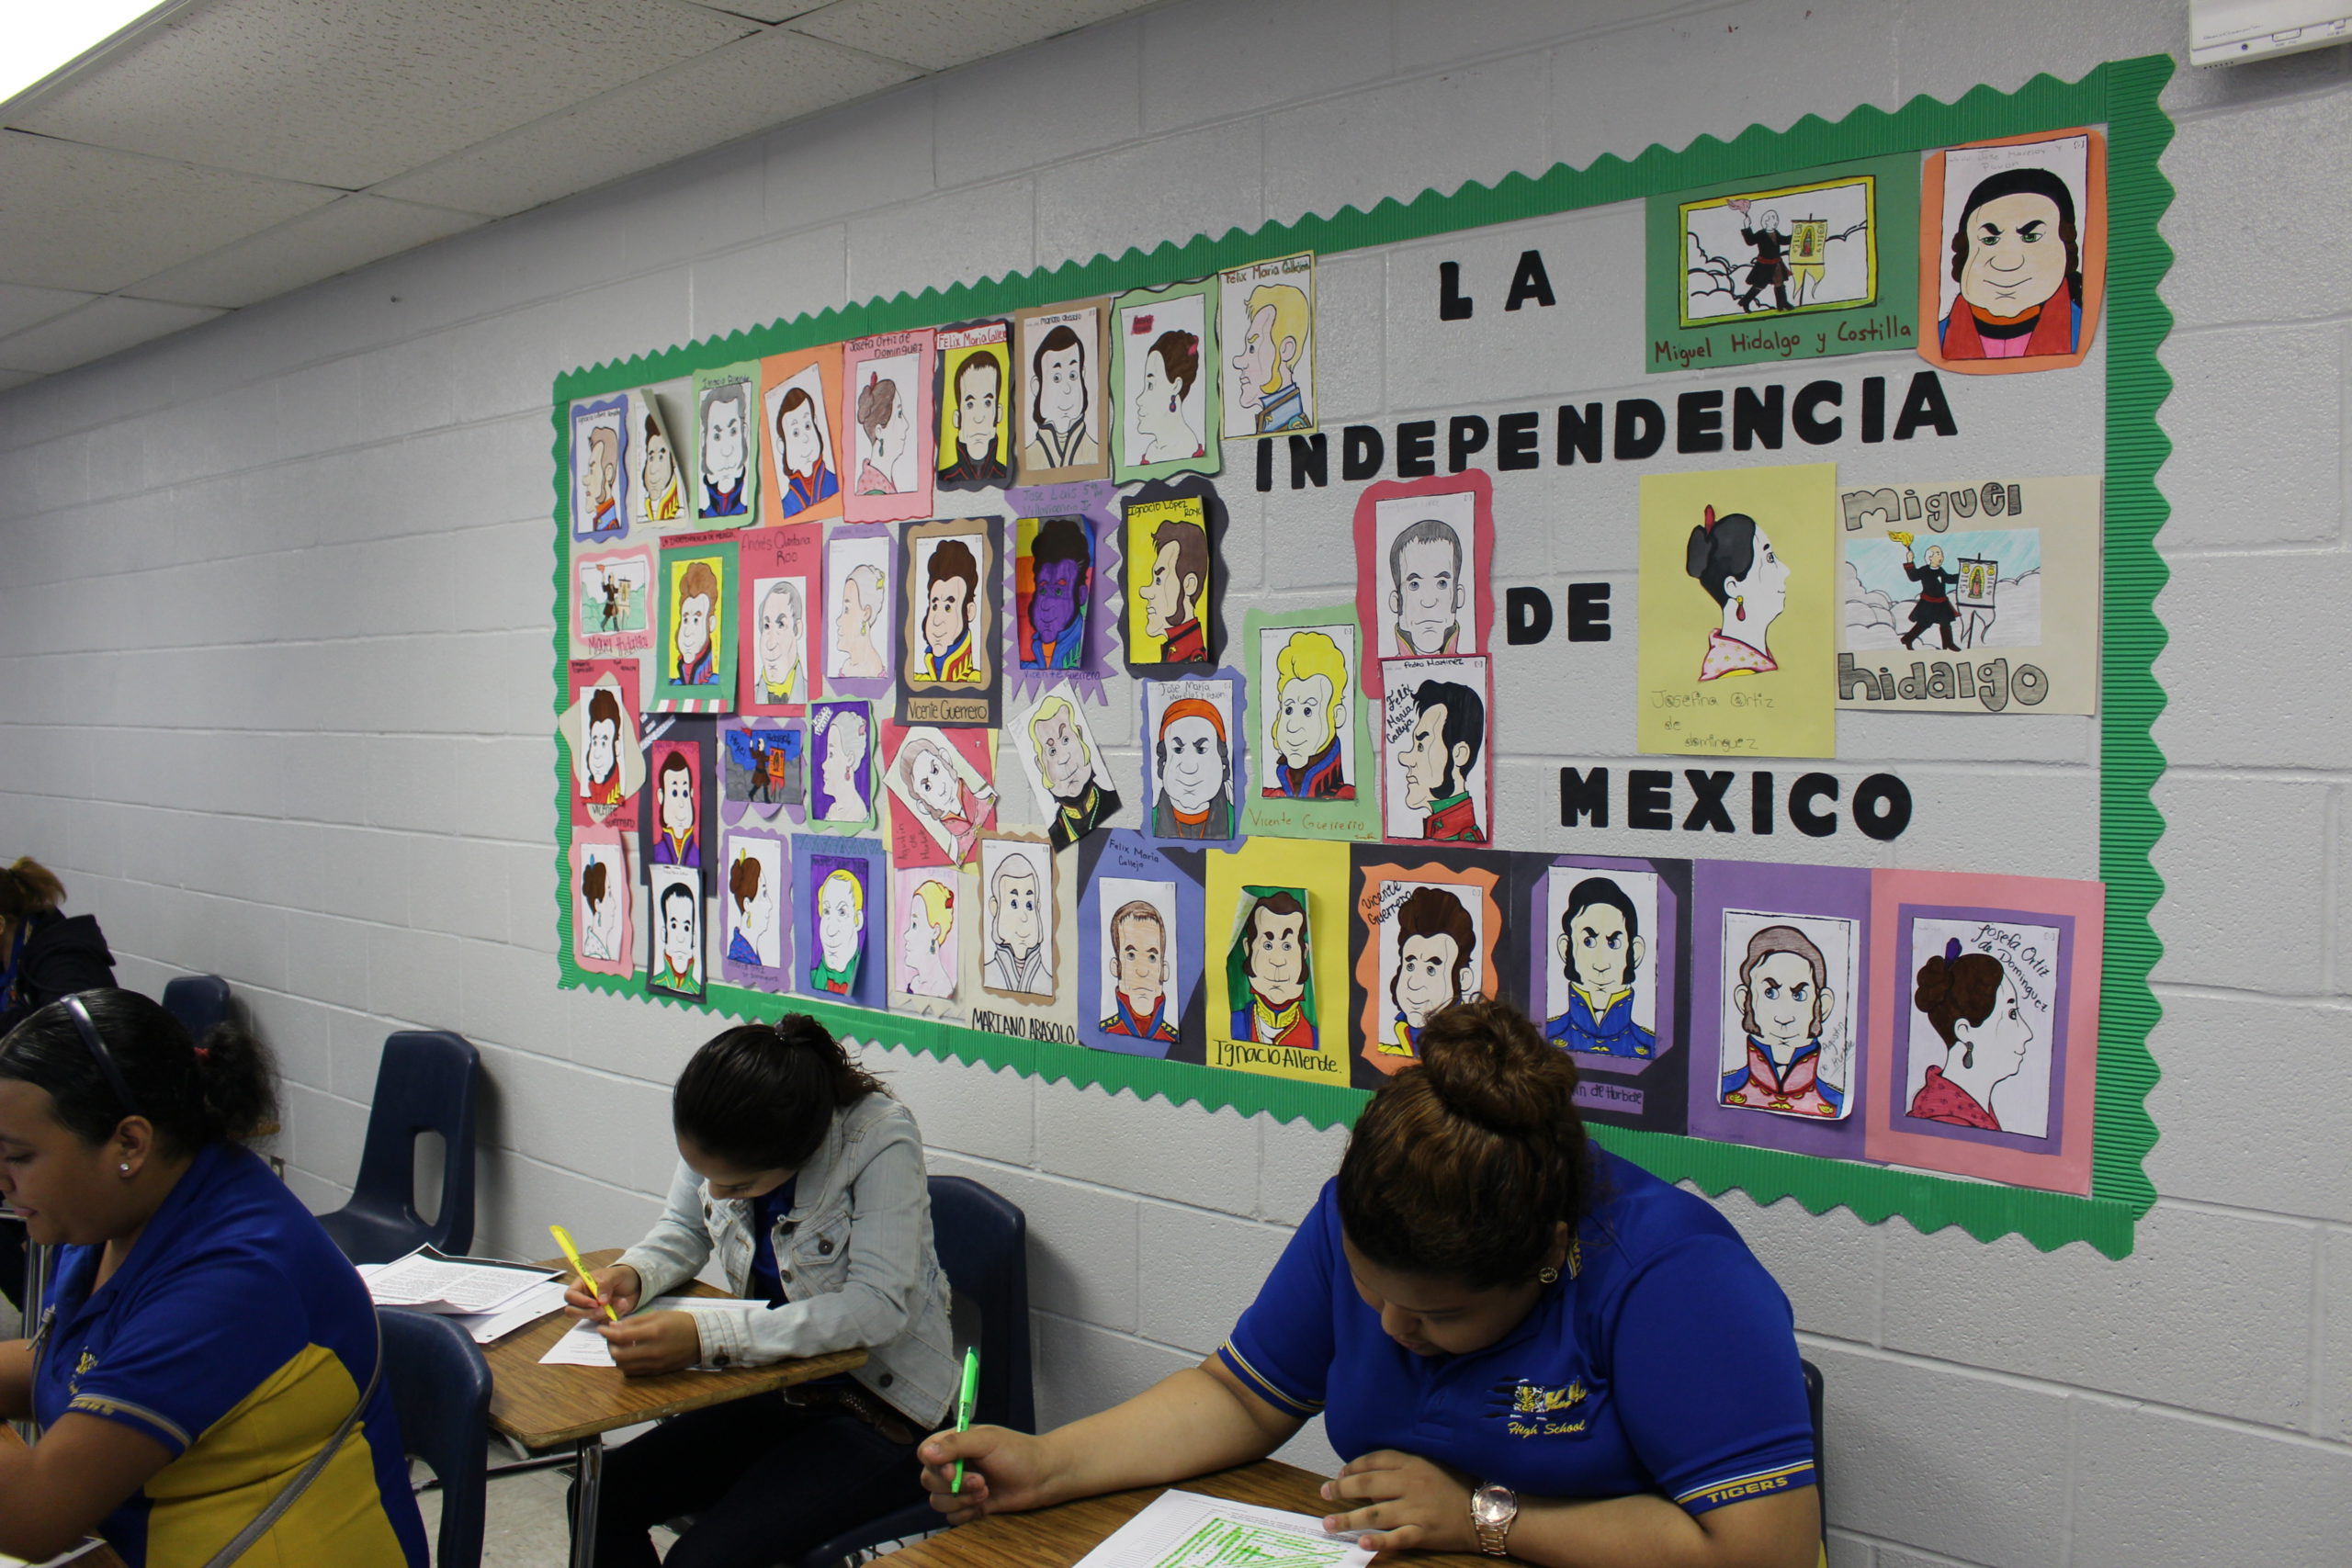 Valley View ISD breaks down language barriers in schools through an all-day, transitional program.